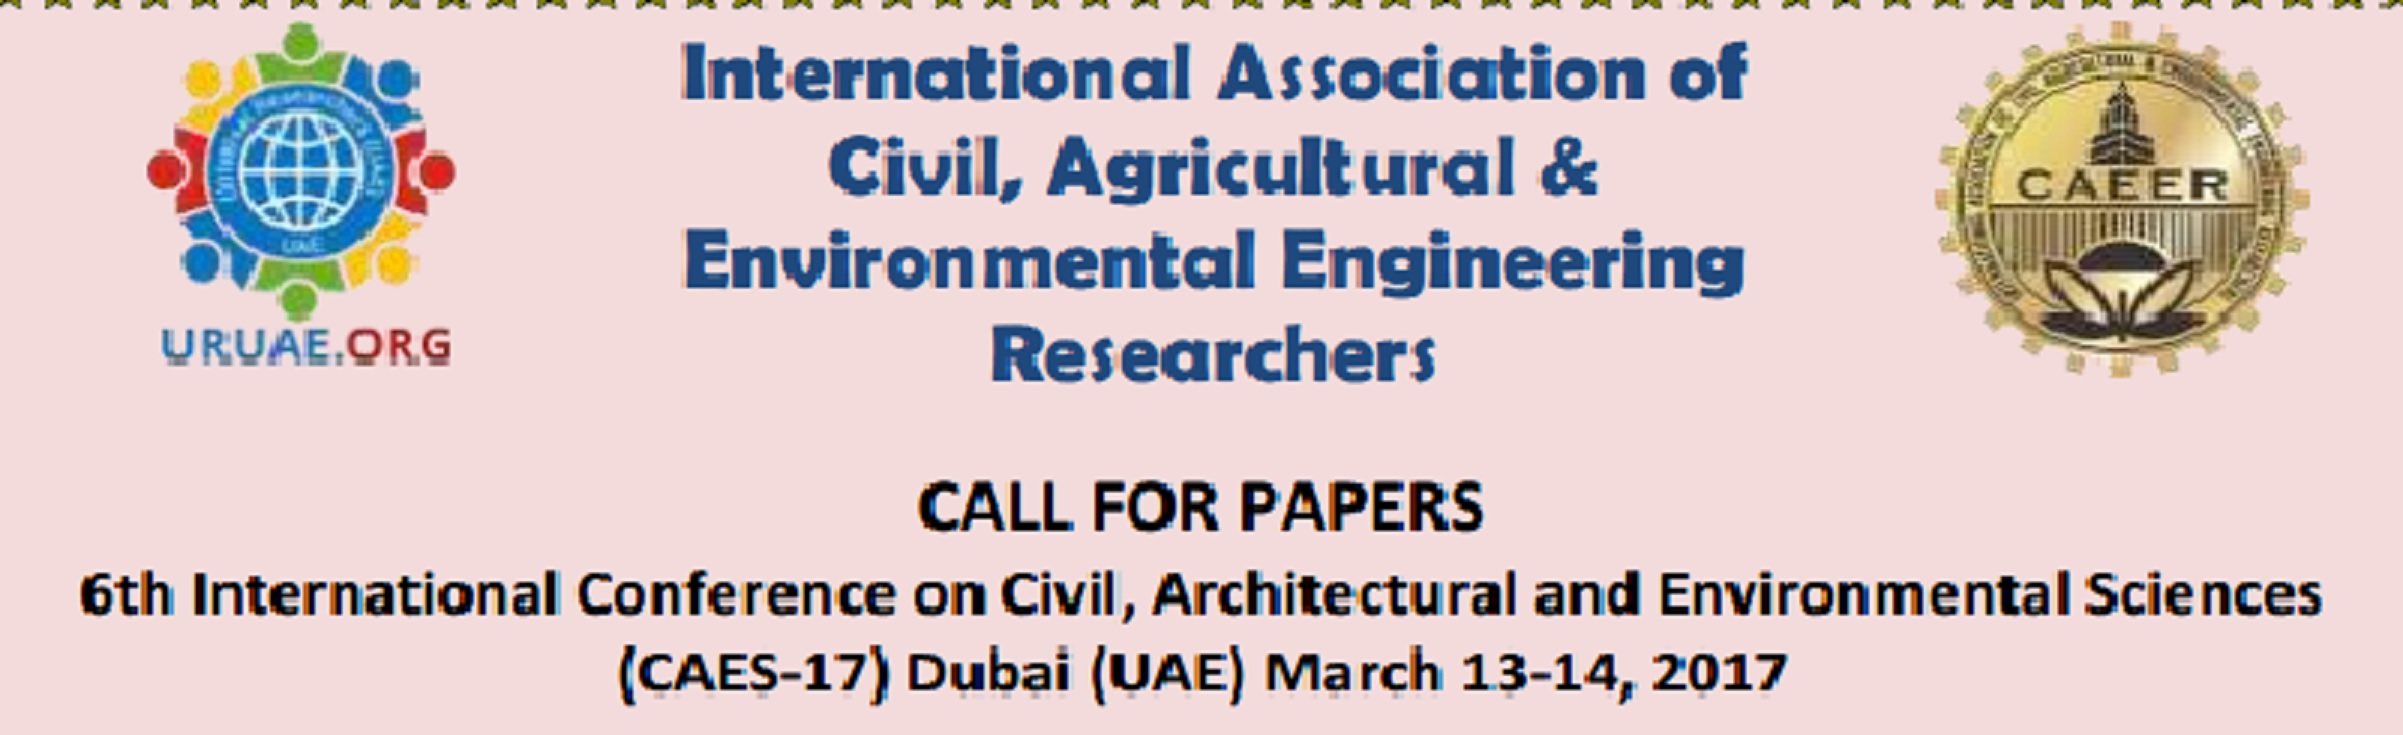 6th International Conference on Civil, Architectural and Environmental Sciences (CAES-17), Dubai, United Arab Emirates